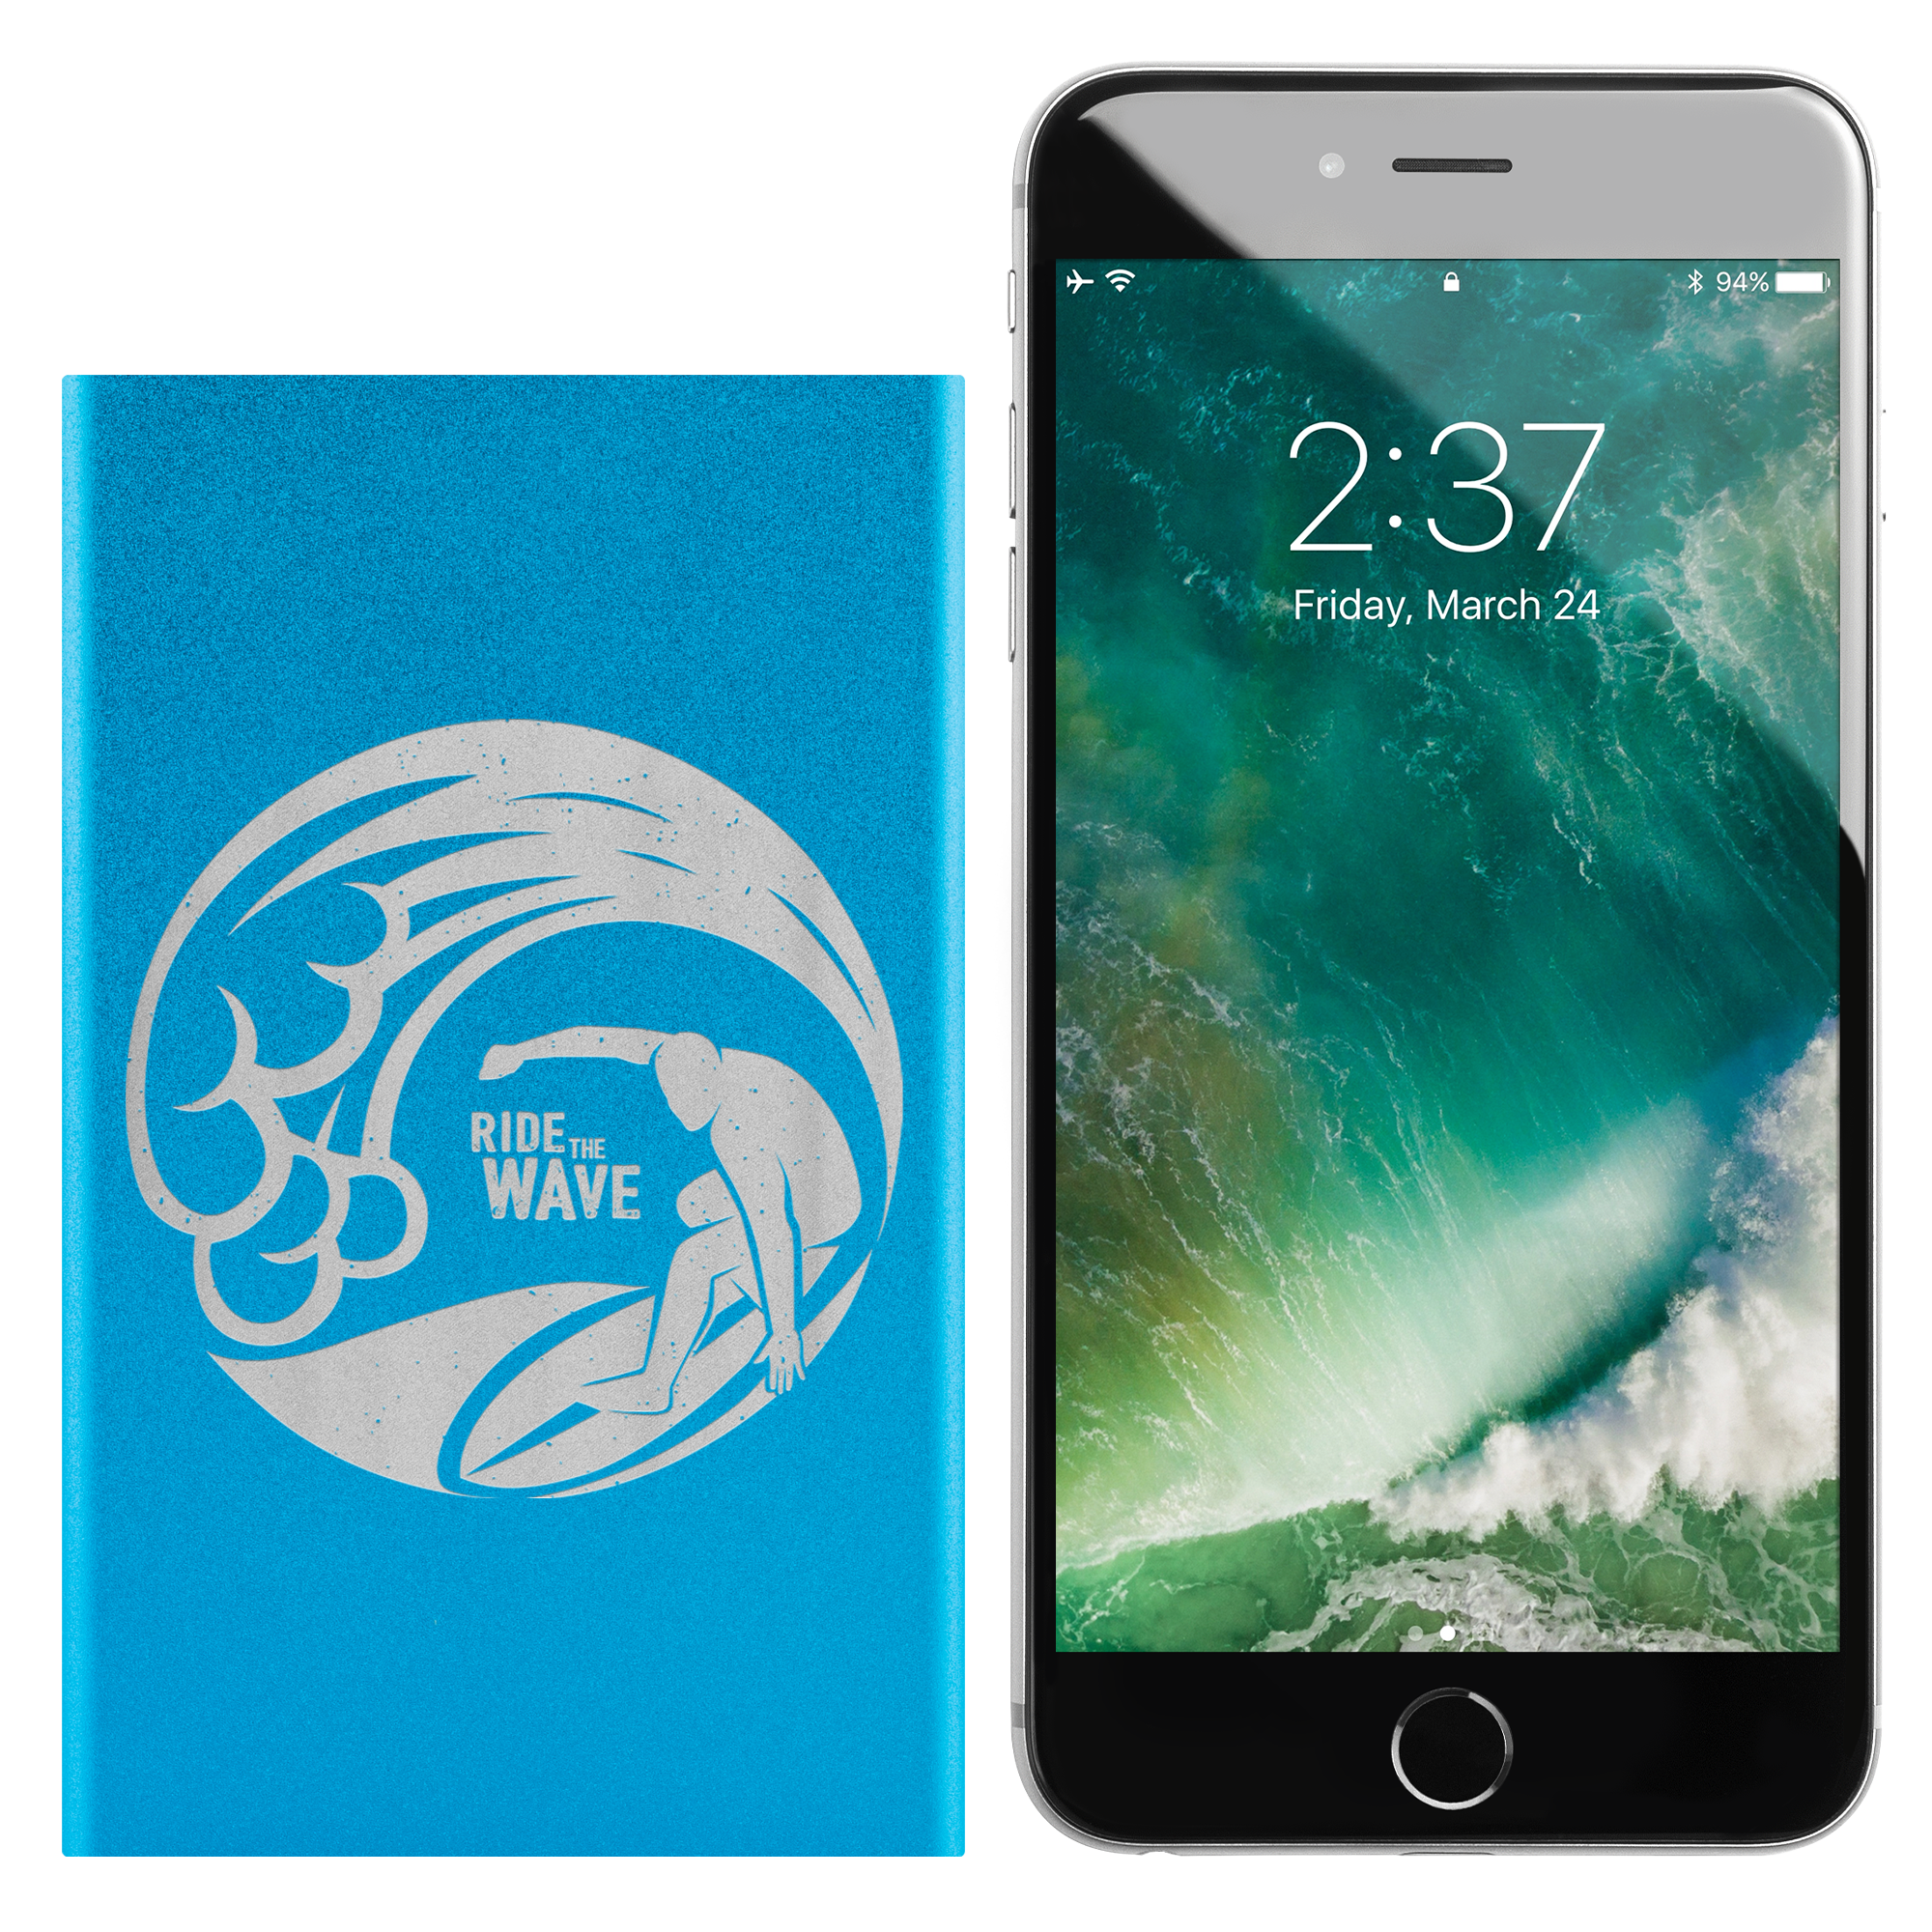 Ride The Wave Power Bank